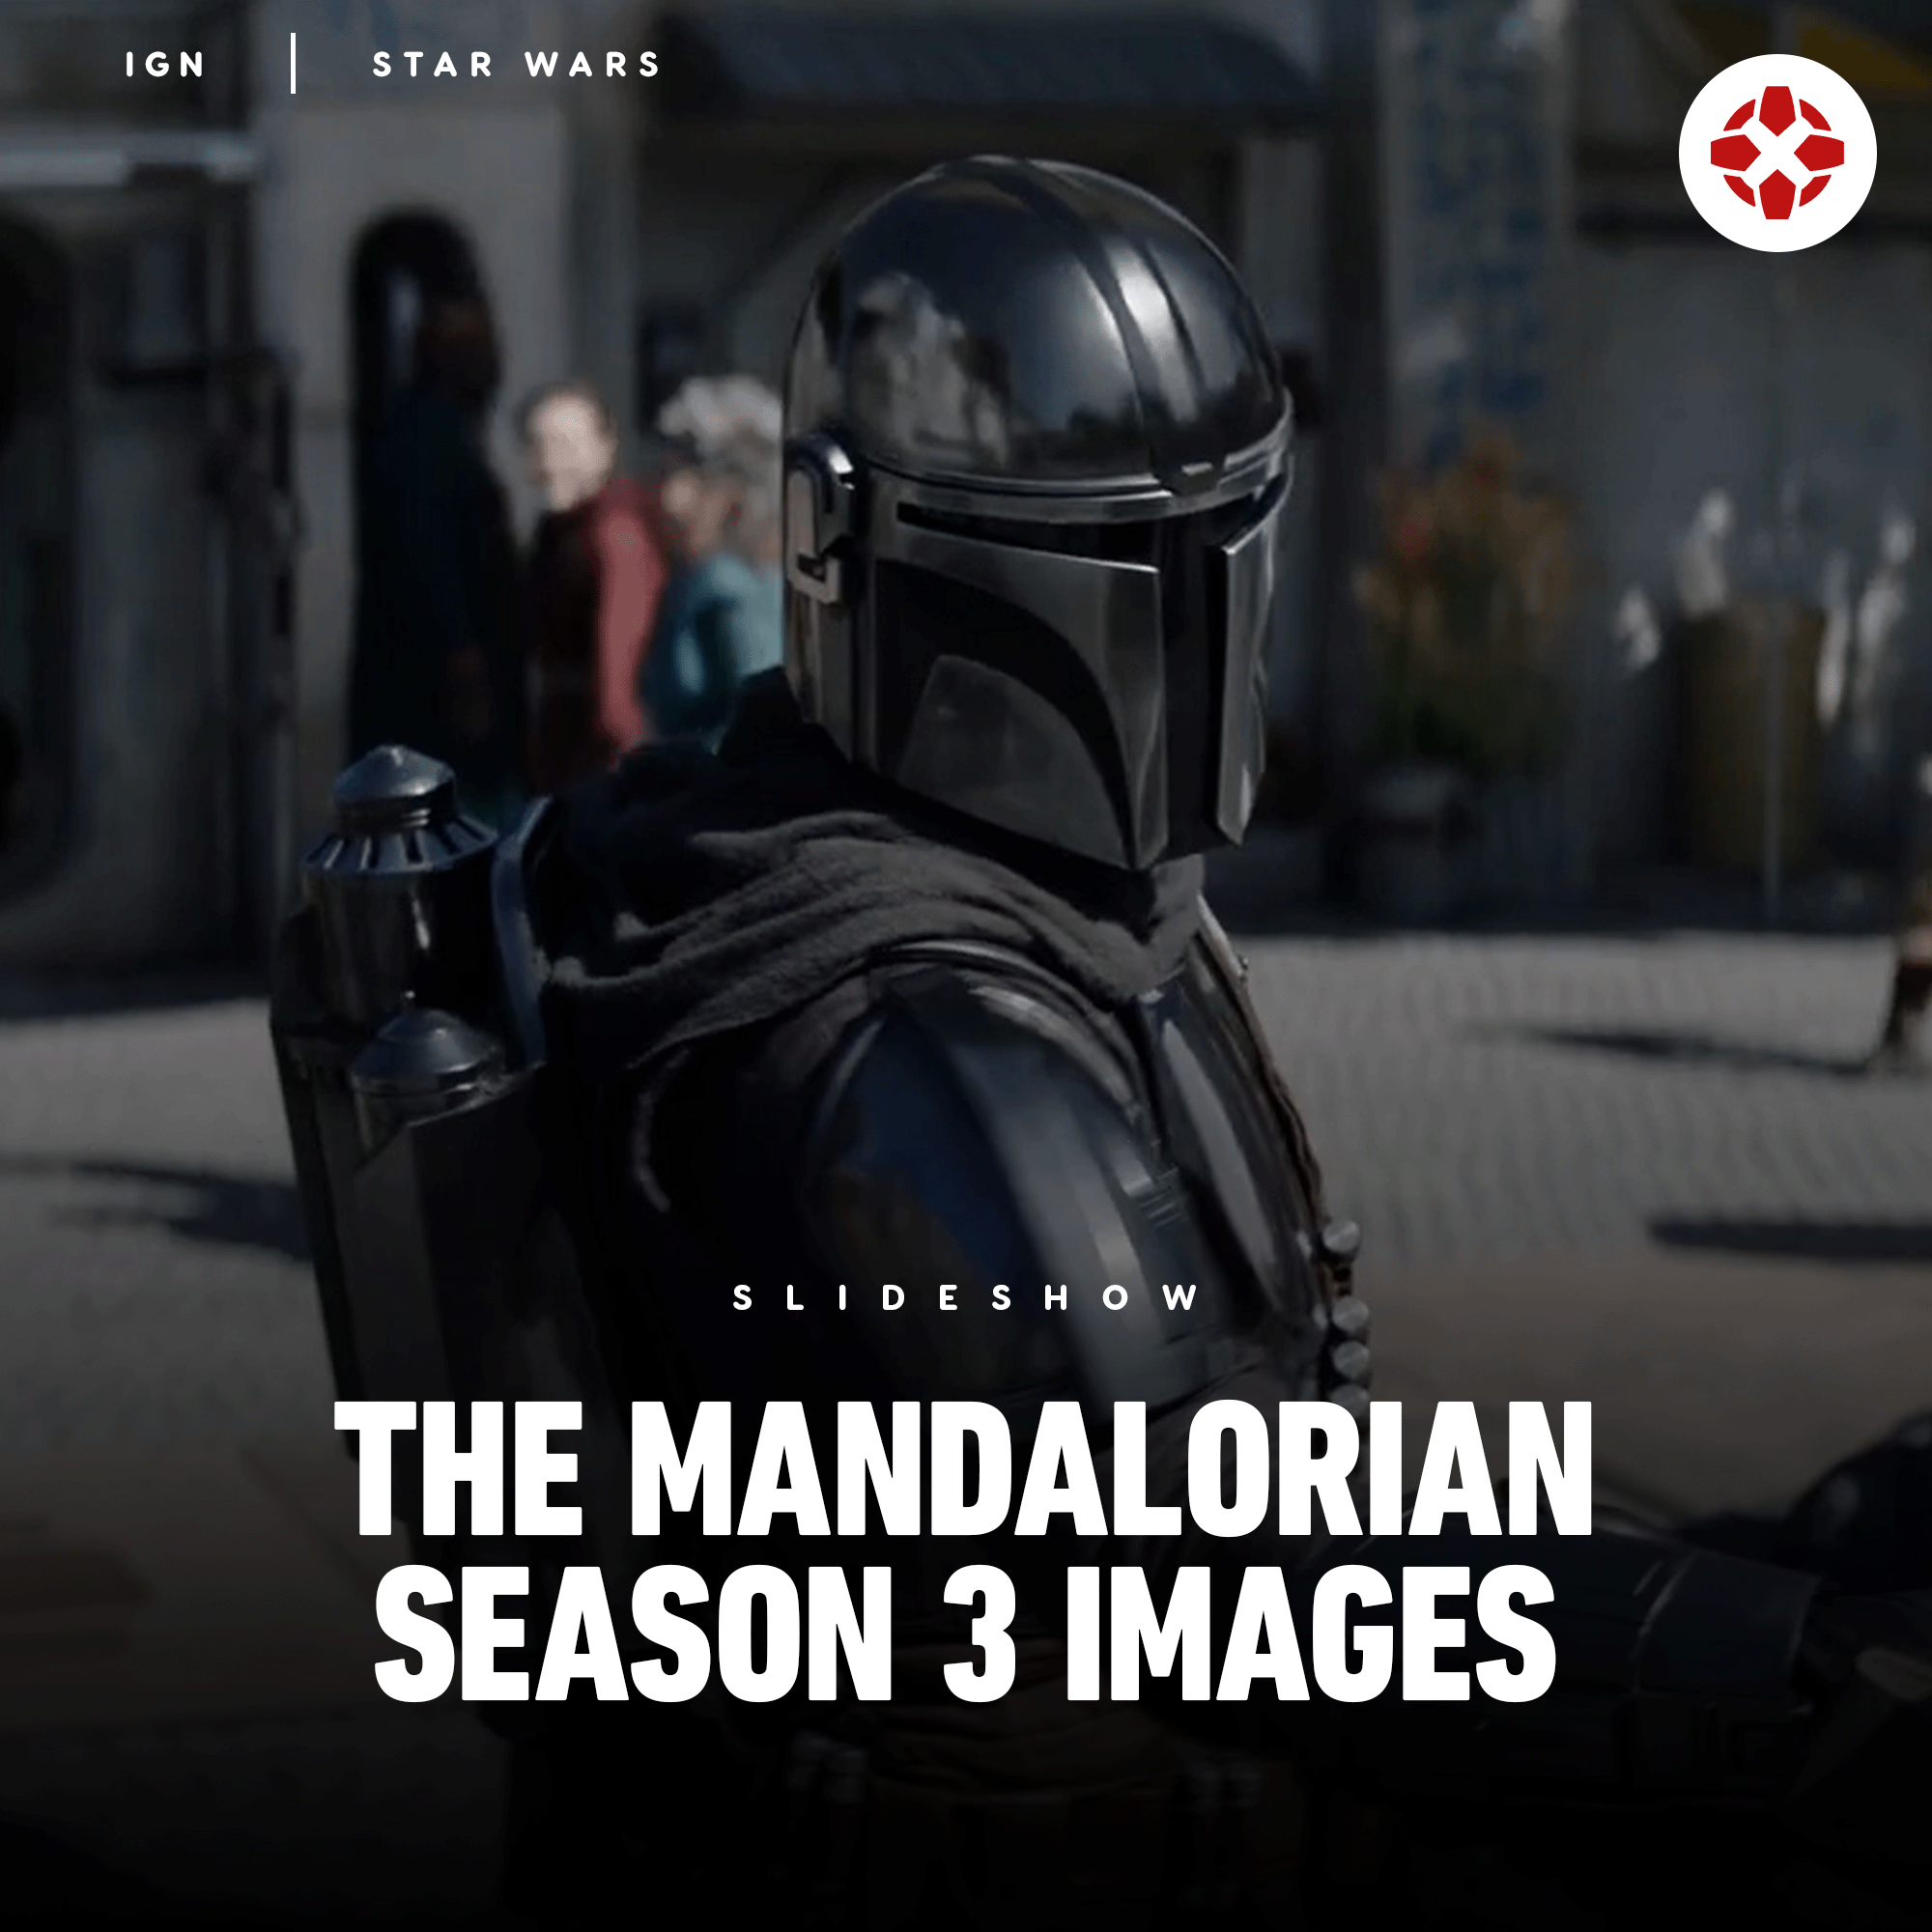 IGN on X: The Mandalorian Season 3 arrives in 2023 and the first trailer  just debuted at the D23 Expo. Check out these new images of Mando himself,  Grogu, Bo Katan, and